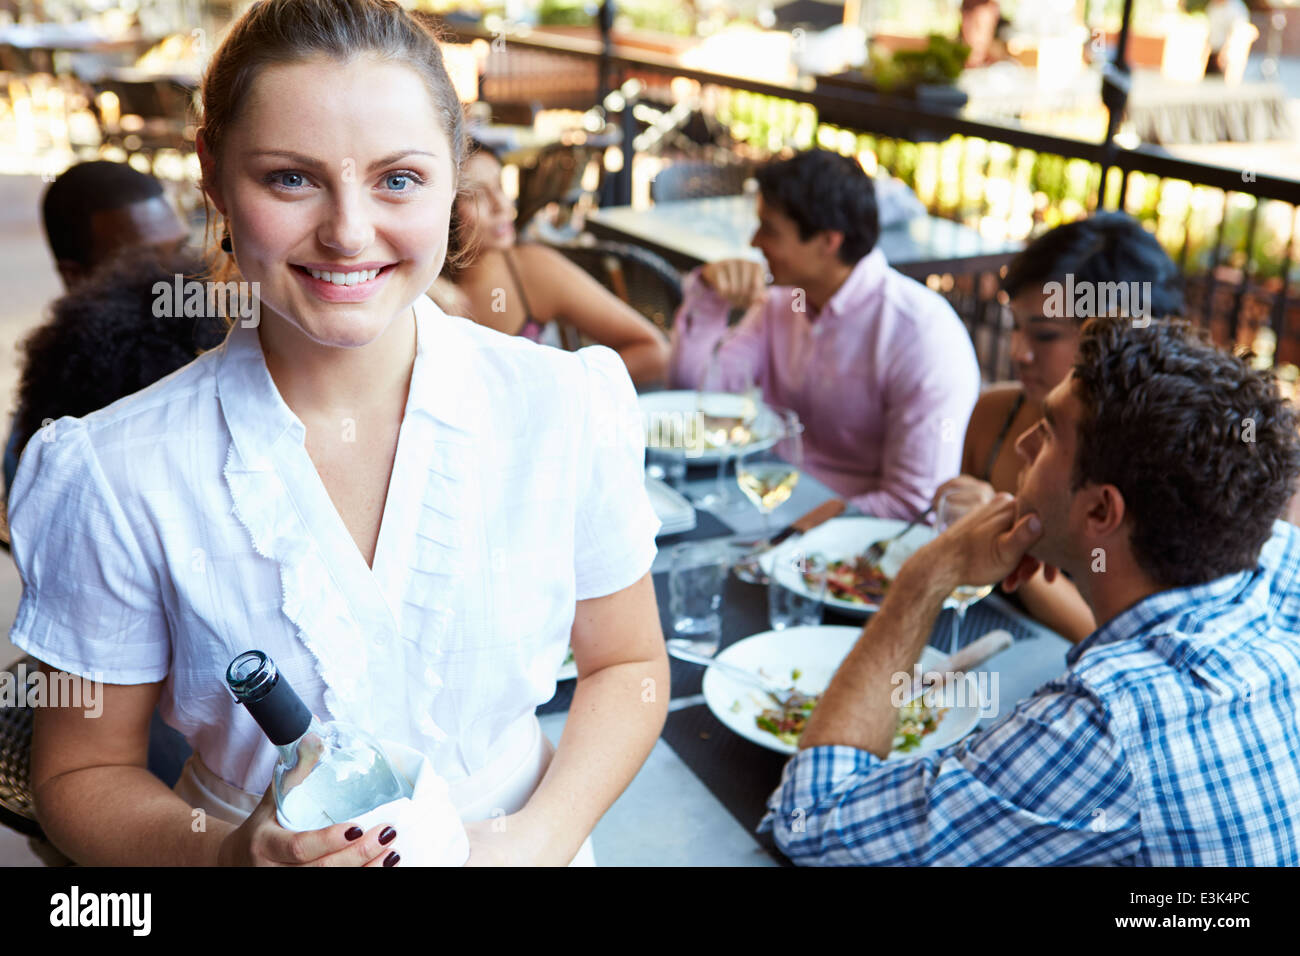 Waitress Serving Tables At Outdoor Restaurant Stock Photo